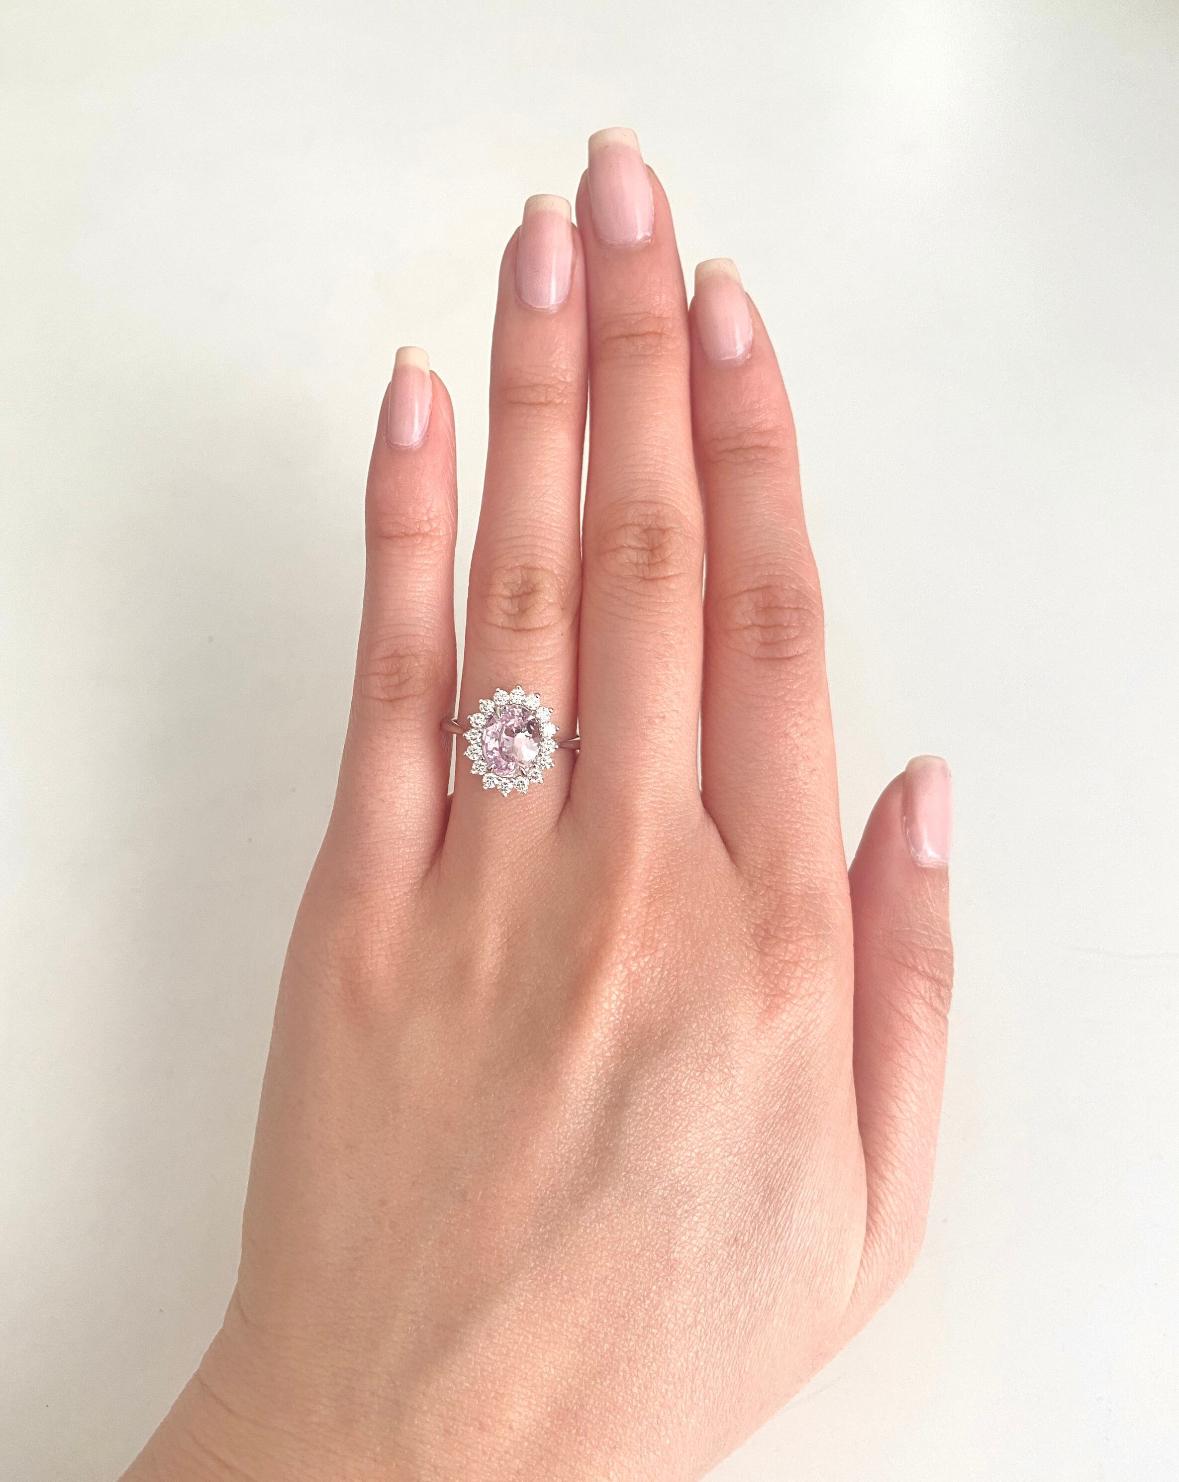 Embrace elegance with this 1.85 carat GIA certified oval unheated pink sapphire diamond halo ring in 14k white gold. The delicate band accentuates the soft, pale pink hue of the sapphire, certified by GIA for authenticity. Surrounded by a sparkling